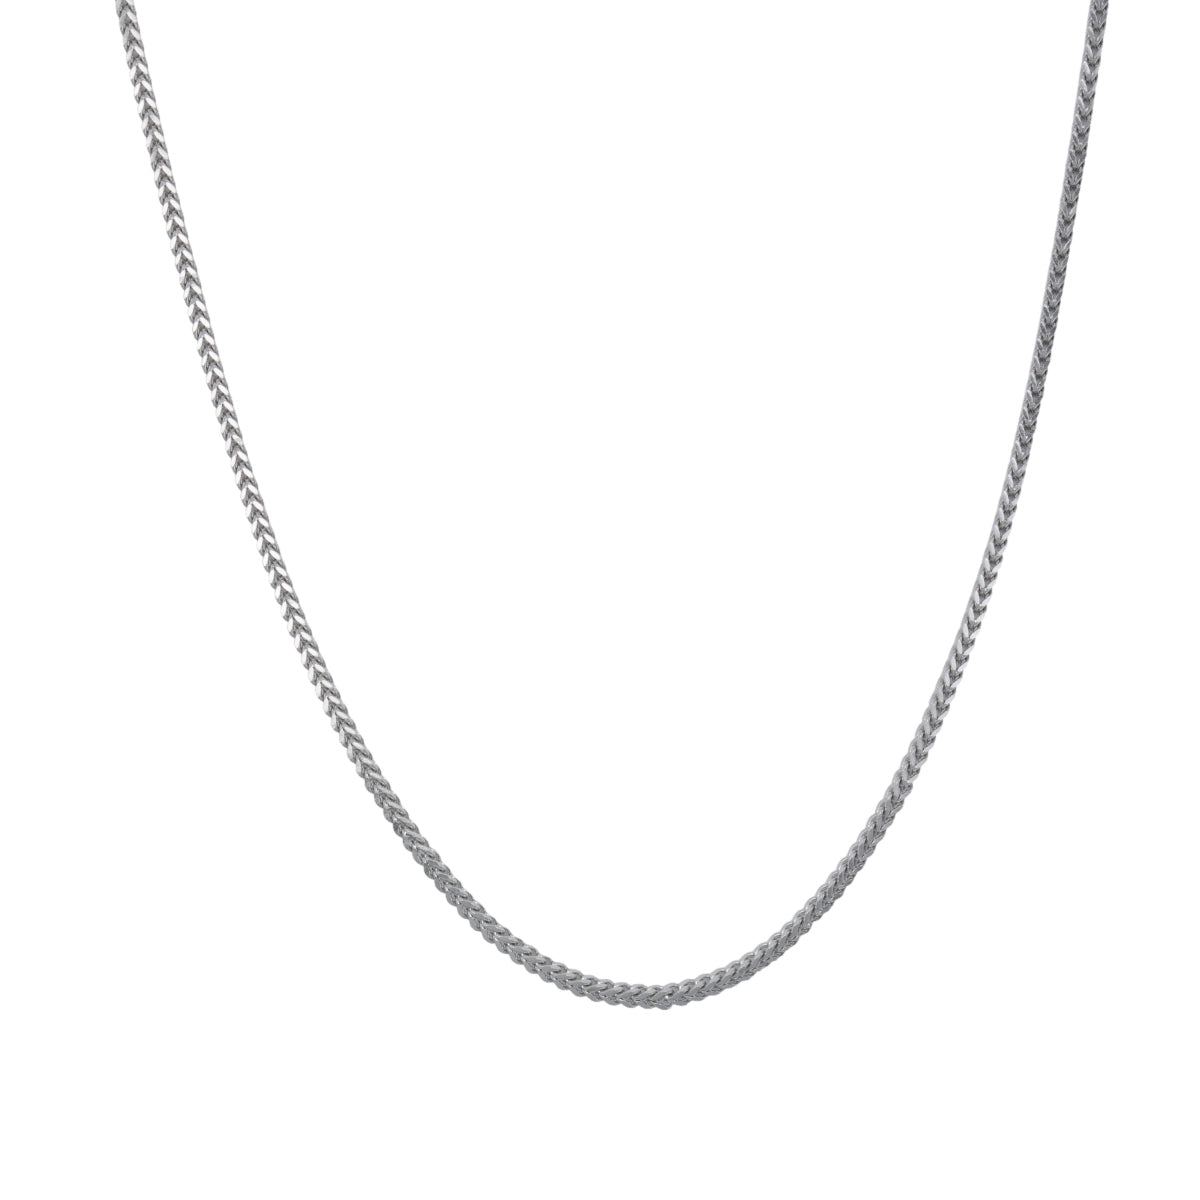 Silver Franco Chain Necklace (3mm)